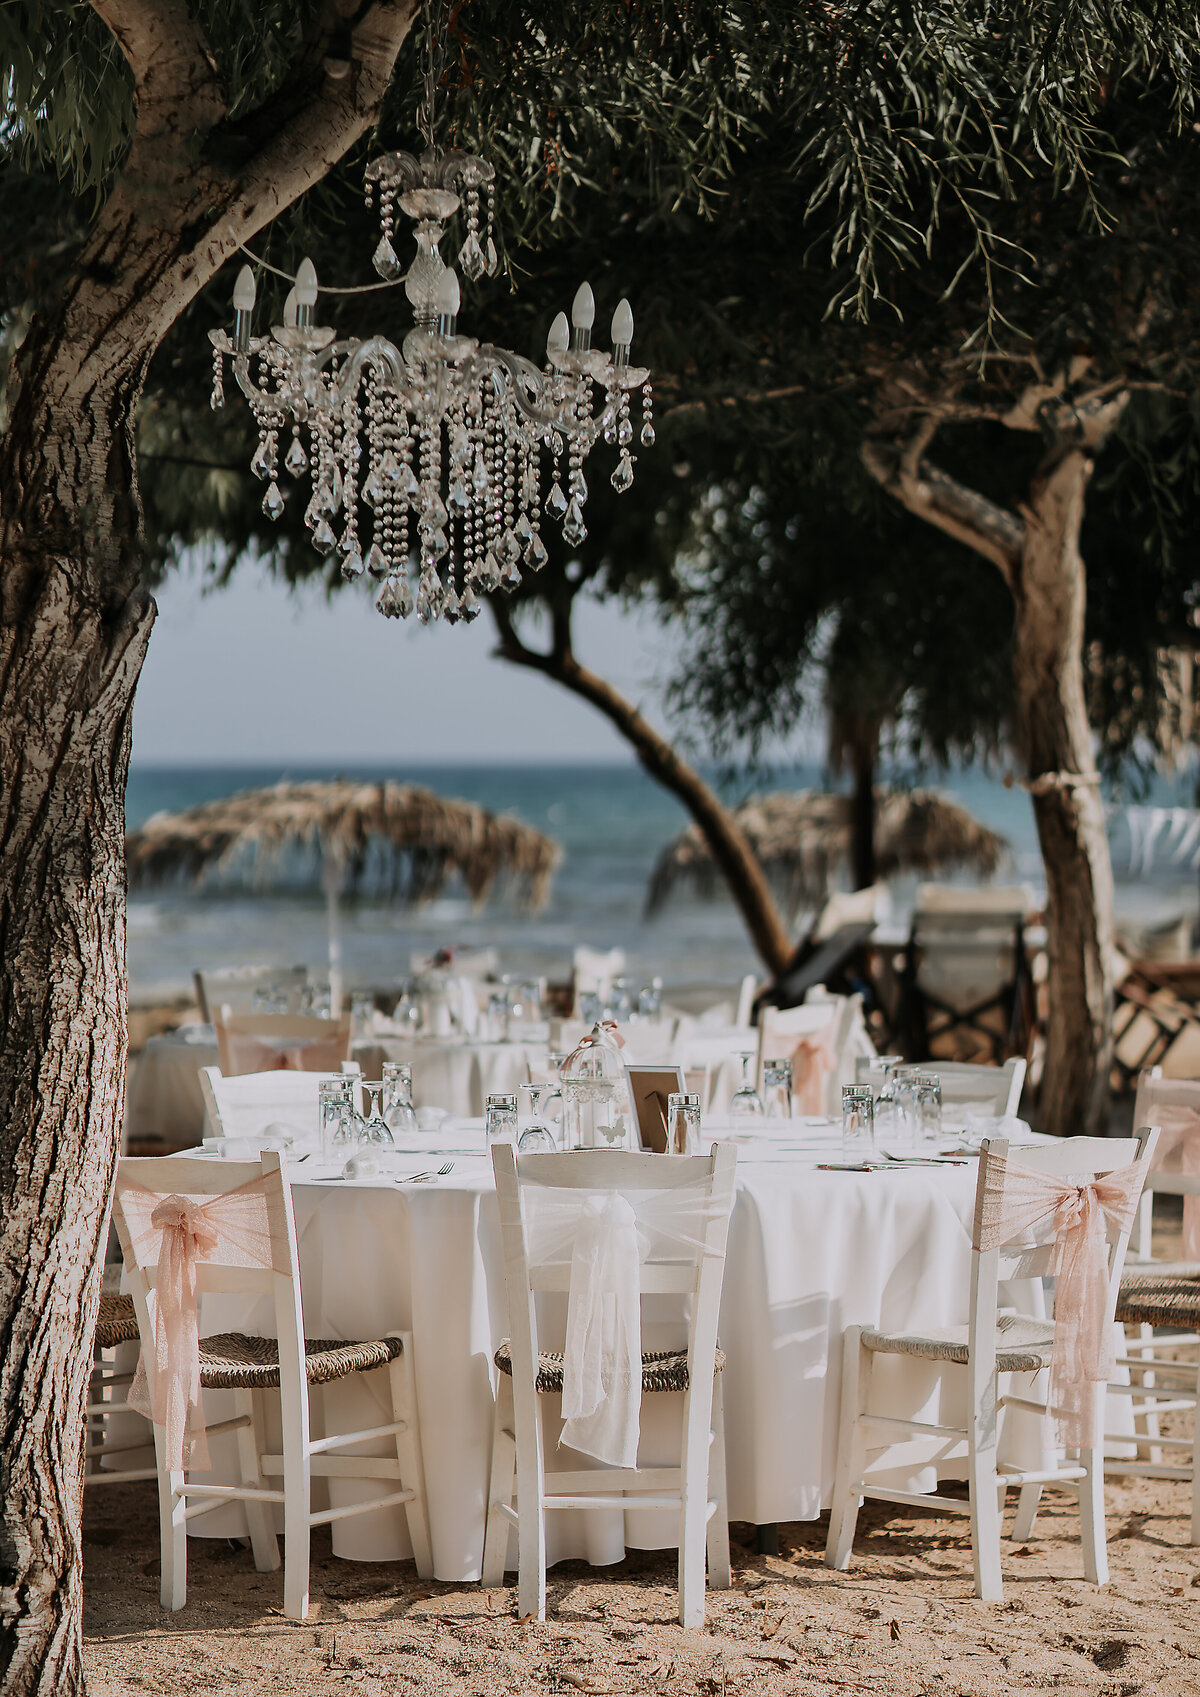 A round table sits in front of the water at the beach under a chandelier hanging from a overhanging tree